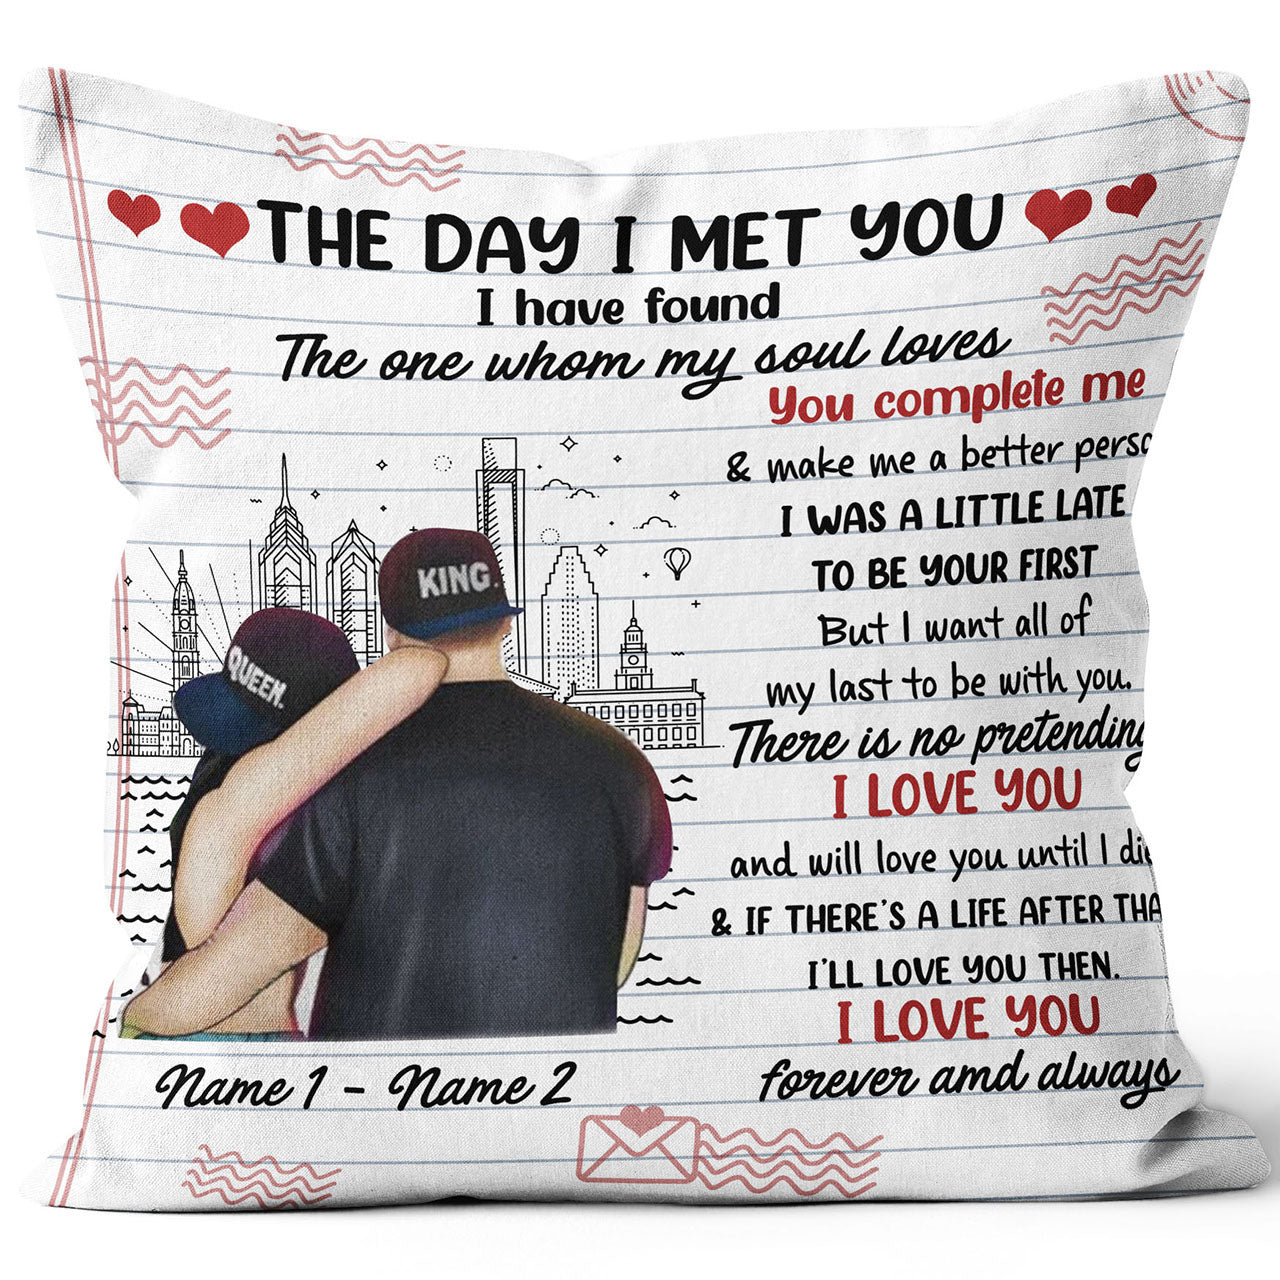 The Day I Met You Throw Pillow, Custom Home Decorations Pillow Gift ideas for Couple